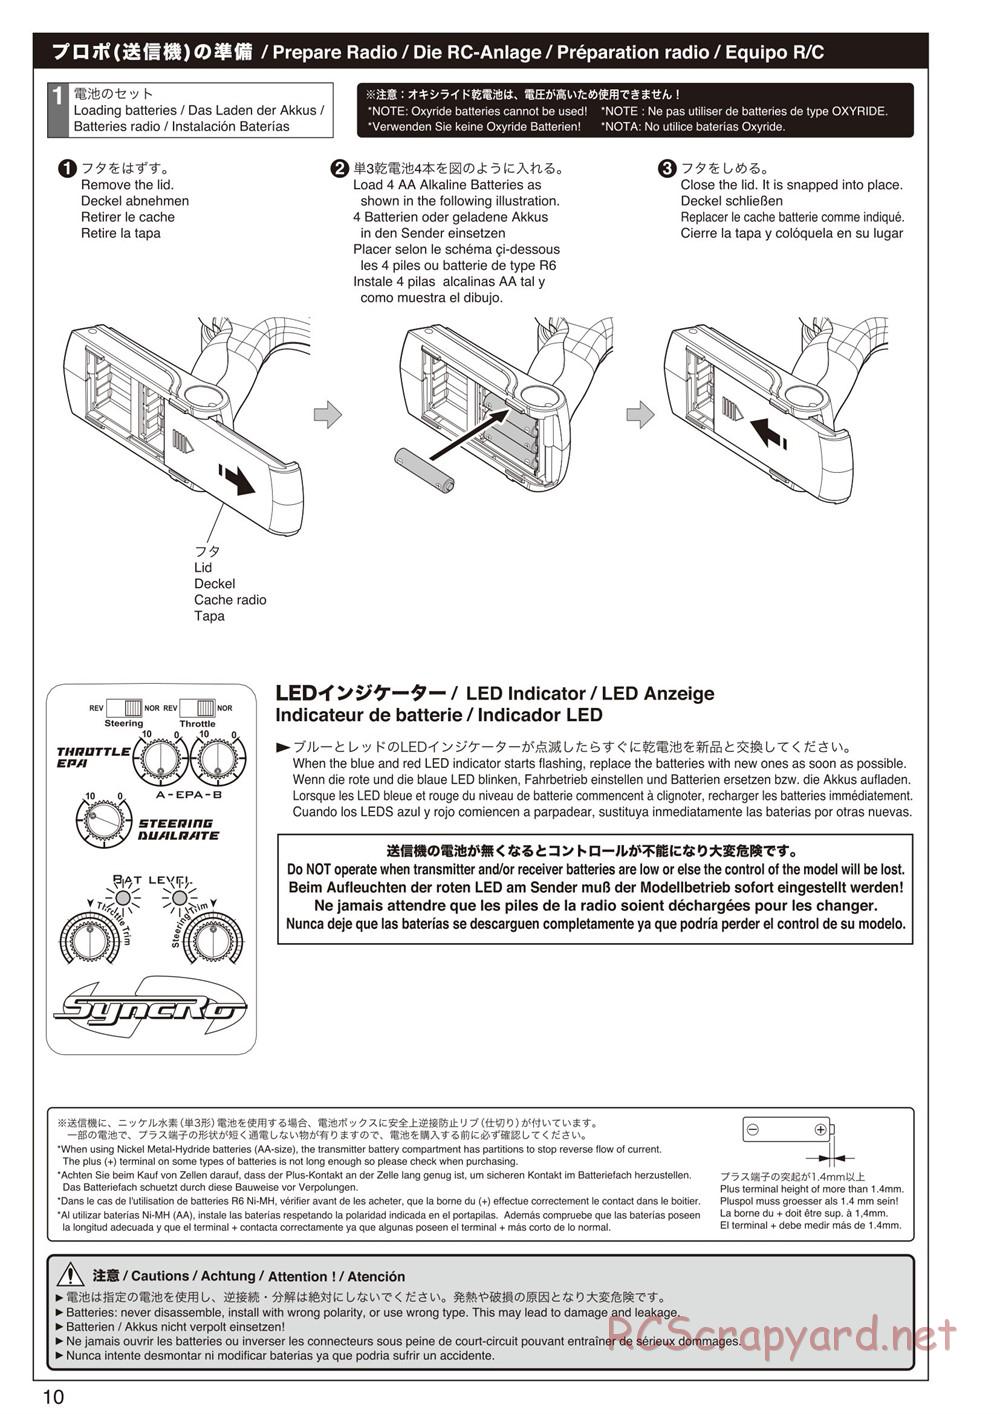 Kyosho - FO-XX VE - Manual - Page 10